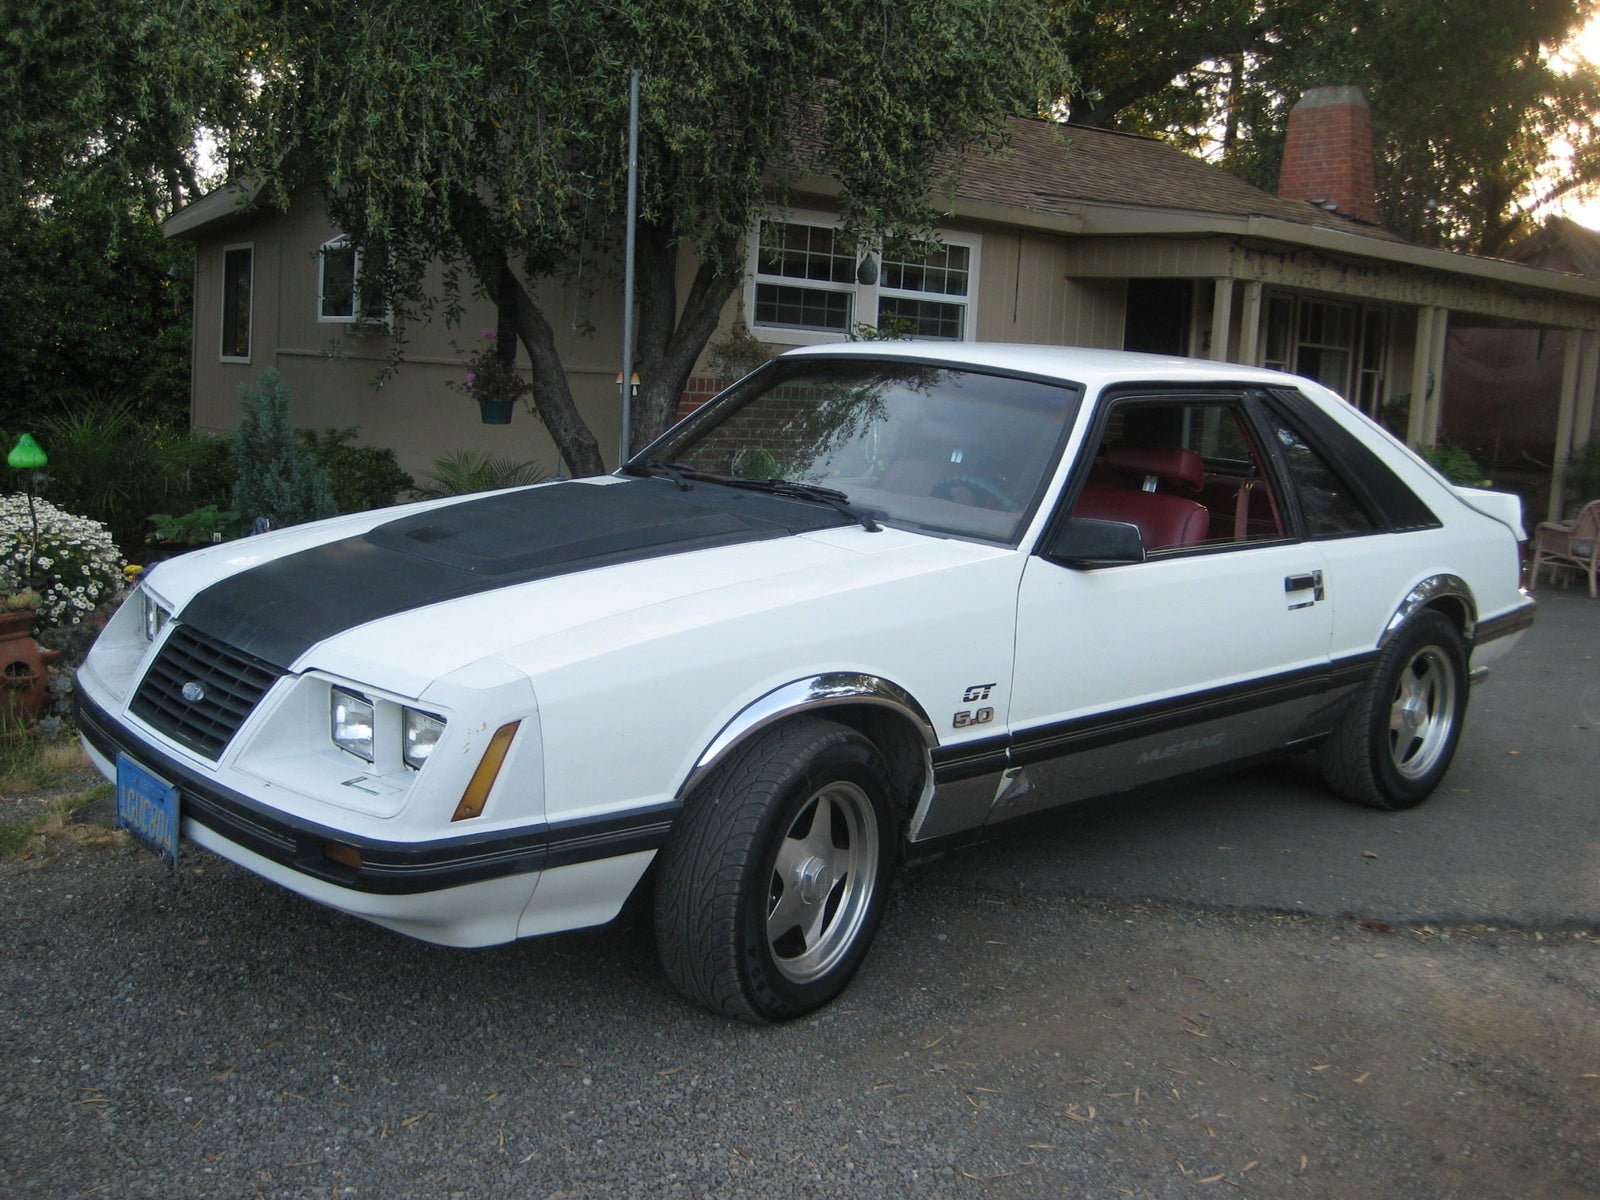 Asked by mitzivalera May 04, 2014 at 03:09 PM about the 1983 Ford Mustang G...